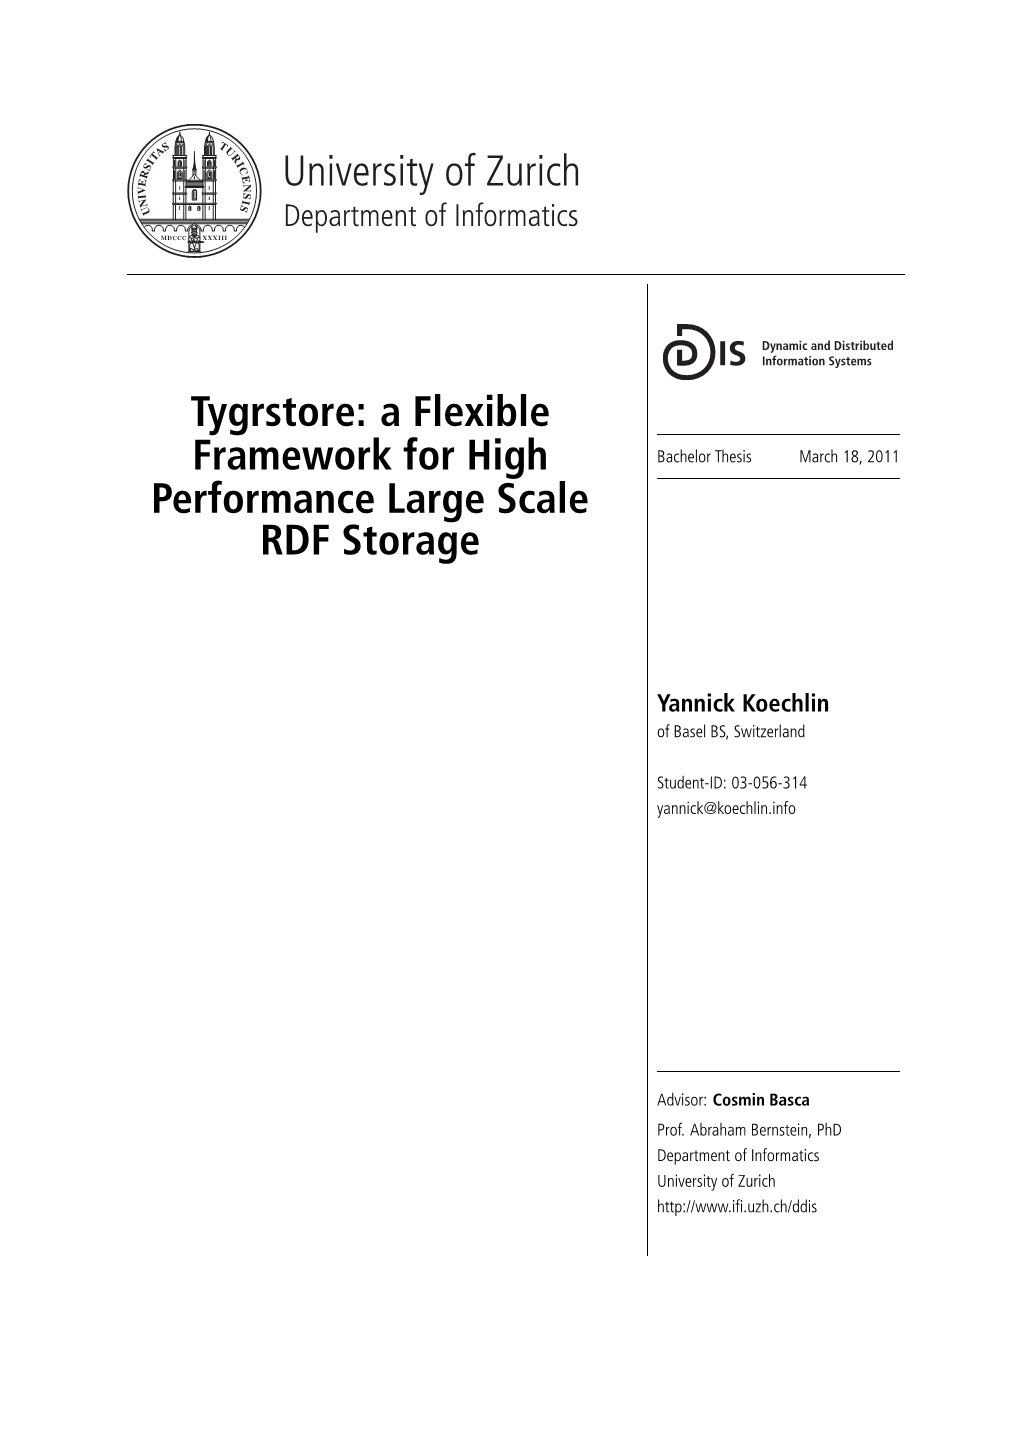 Tygrstore: a Flexible Framework for High Performance Large Scale RDF Storage University of Zurich